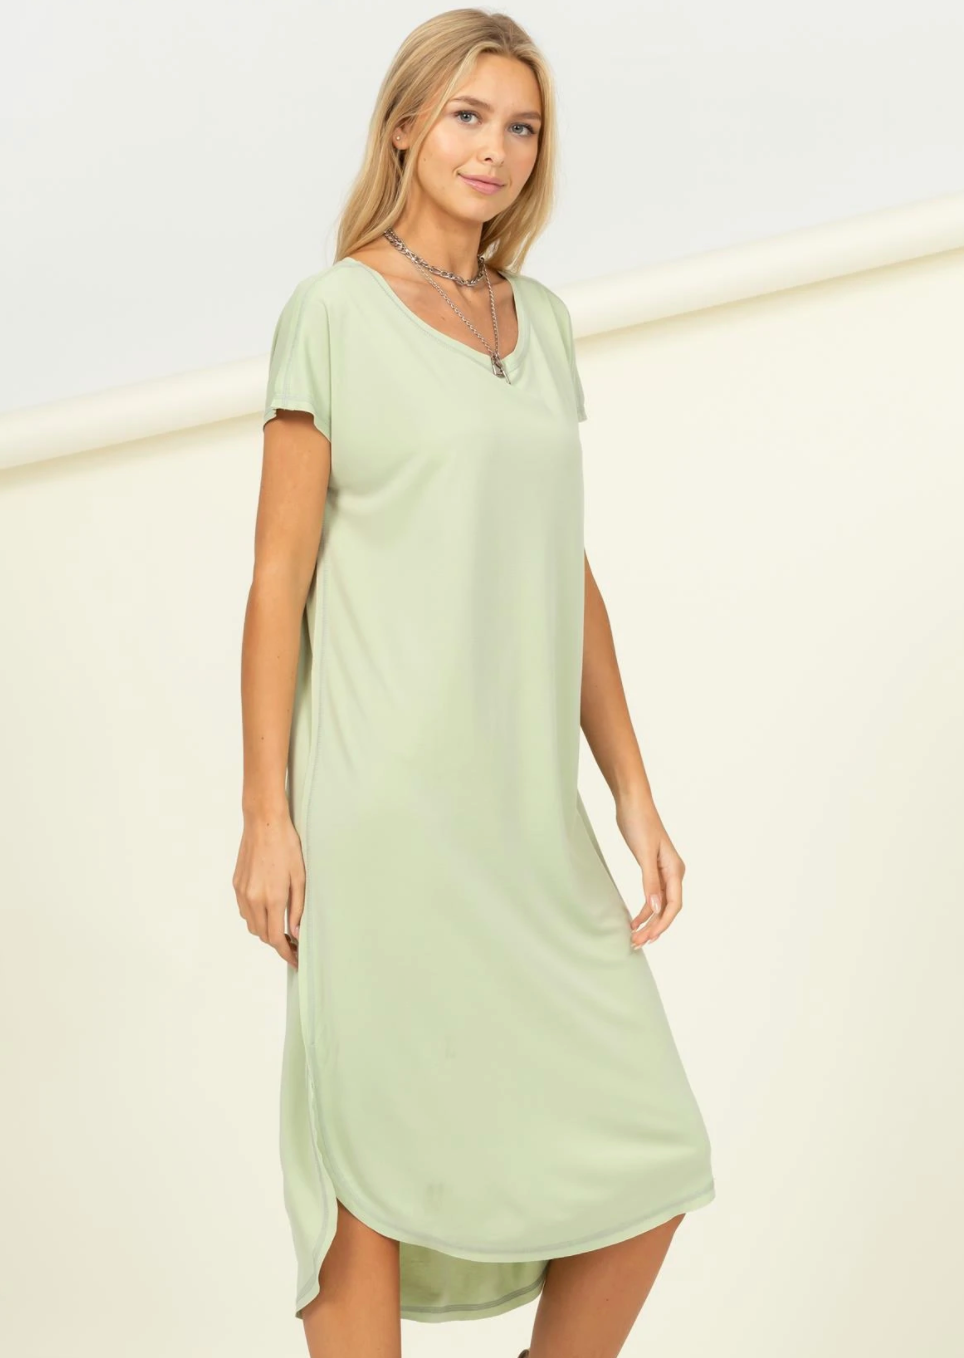 Stay Focused High Low Shirt Dress